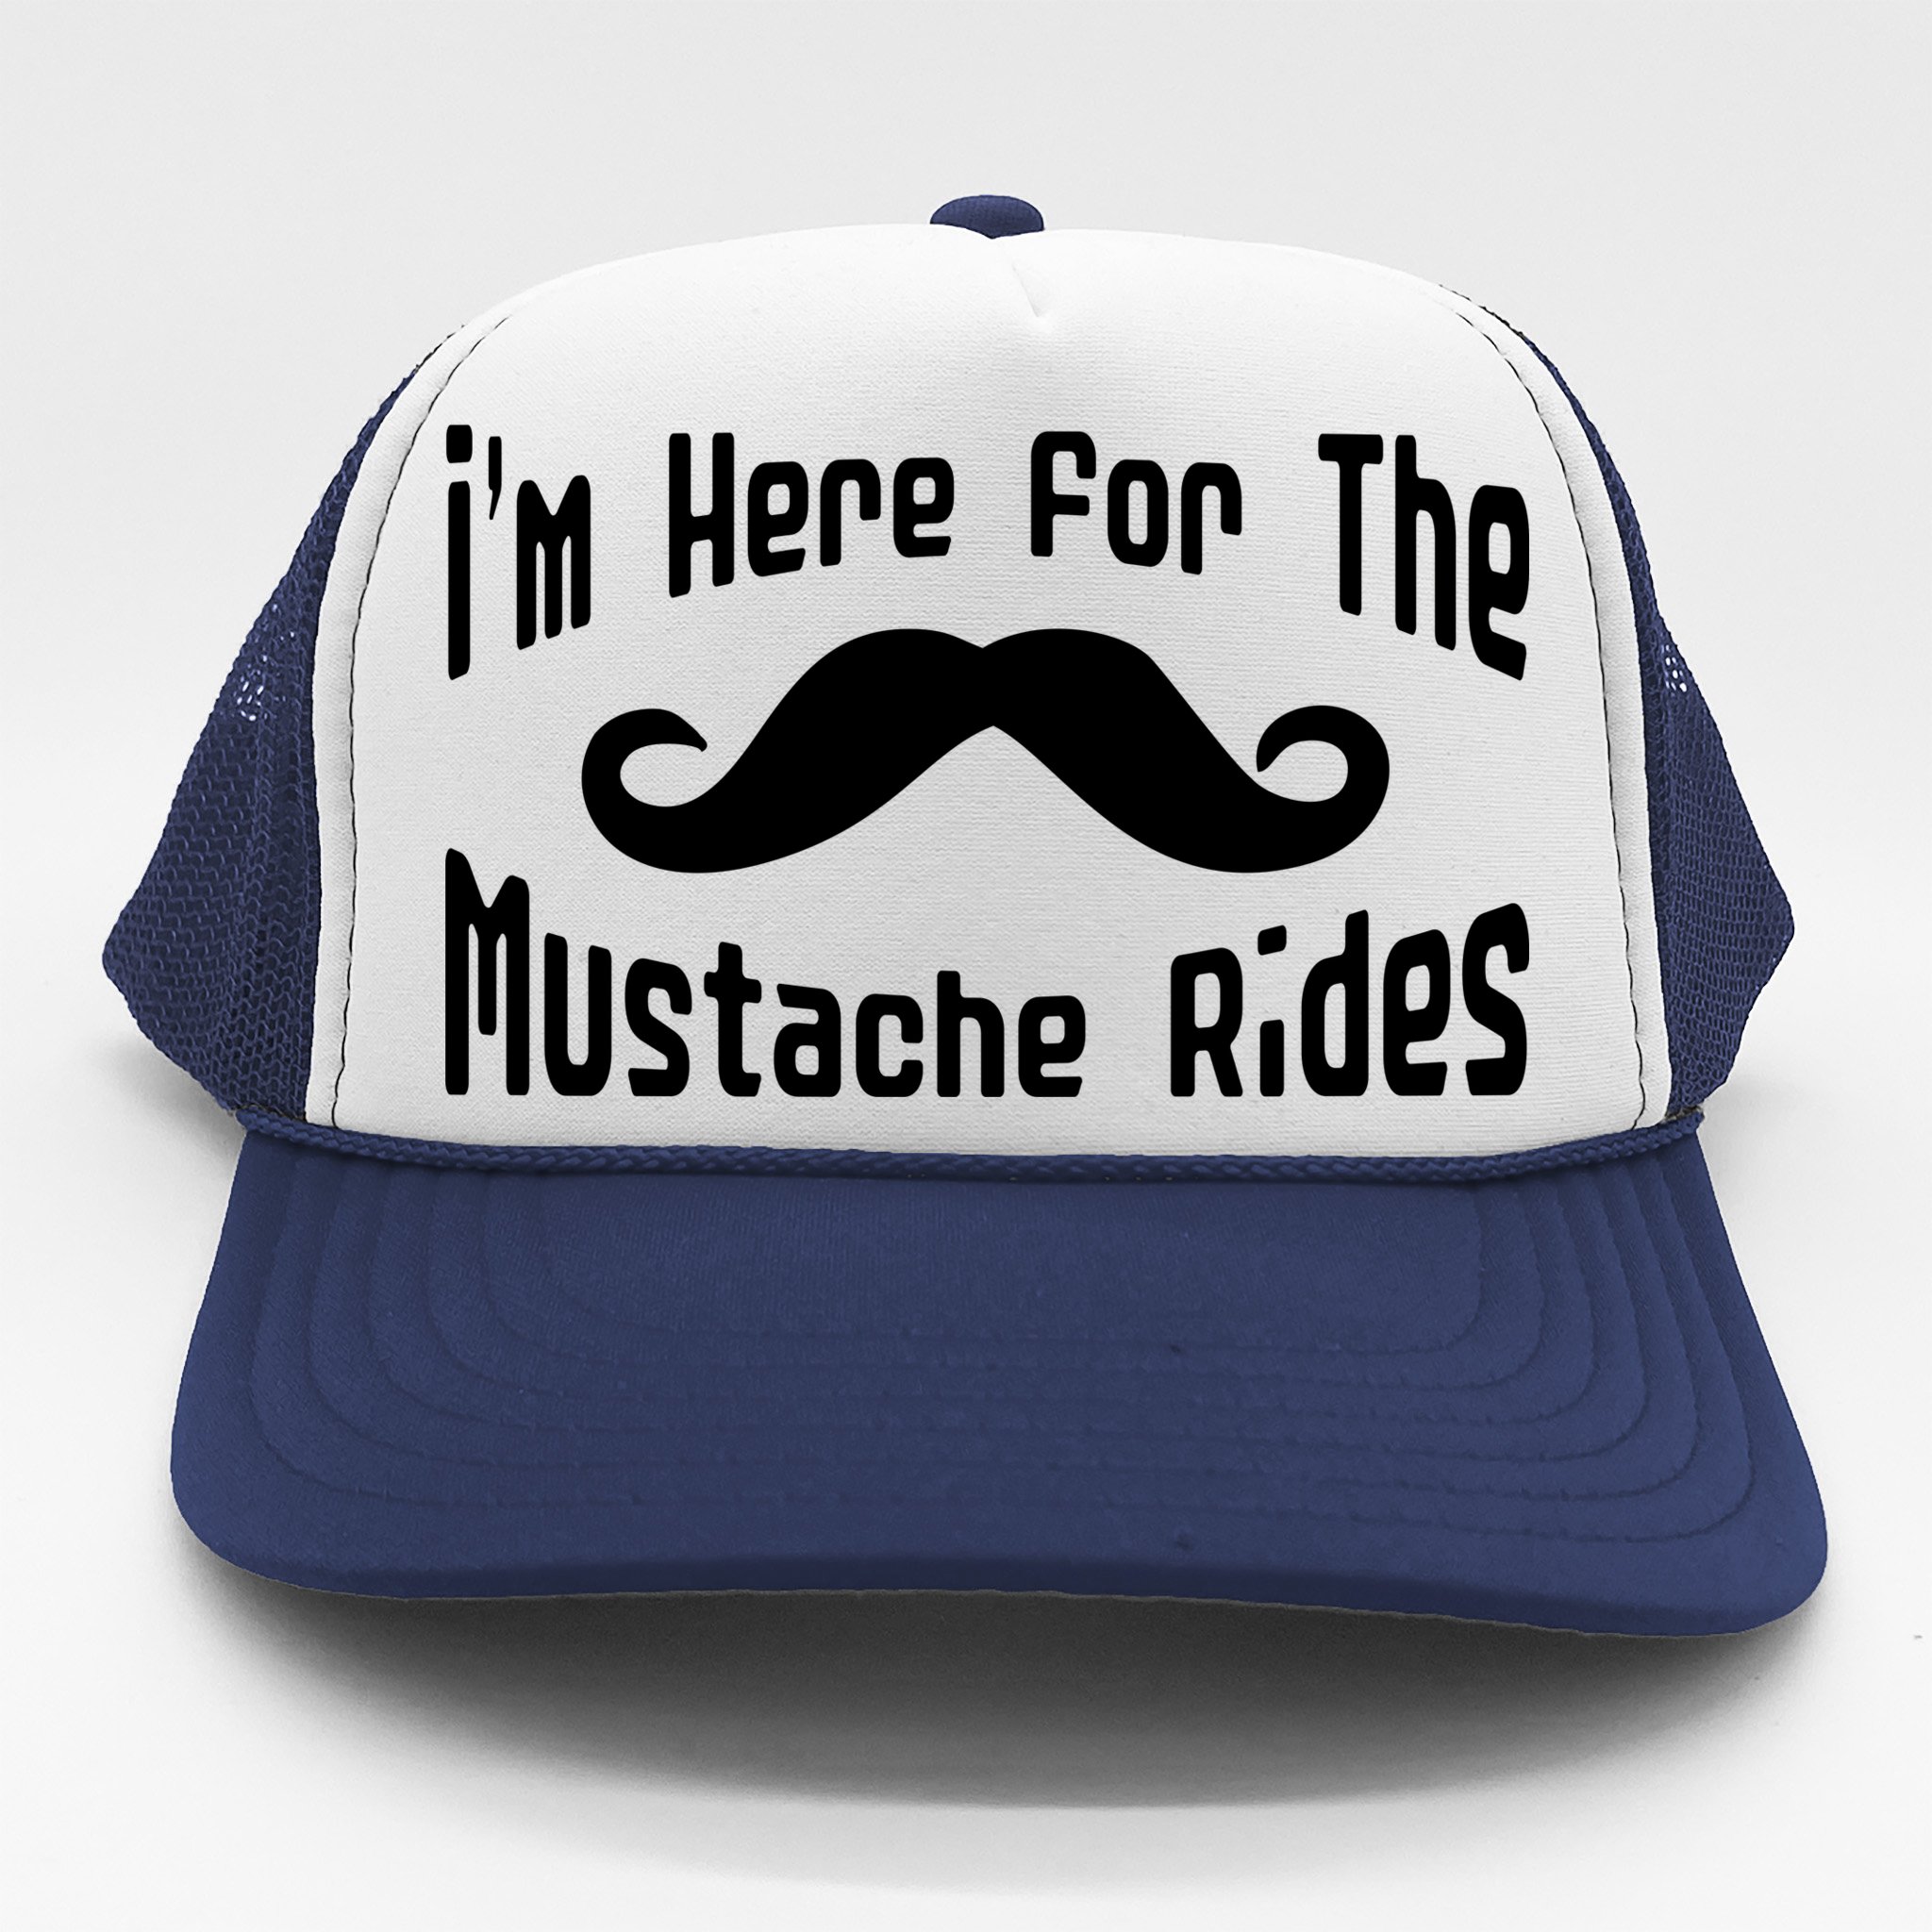 I'm Here for The Mustache Rides Trucker Hat